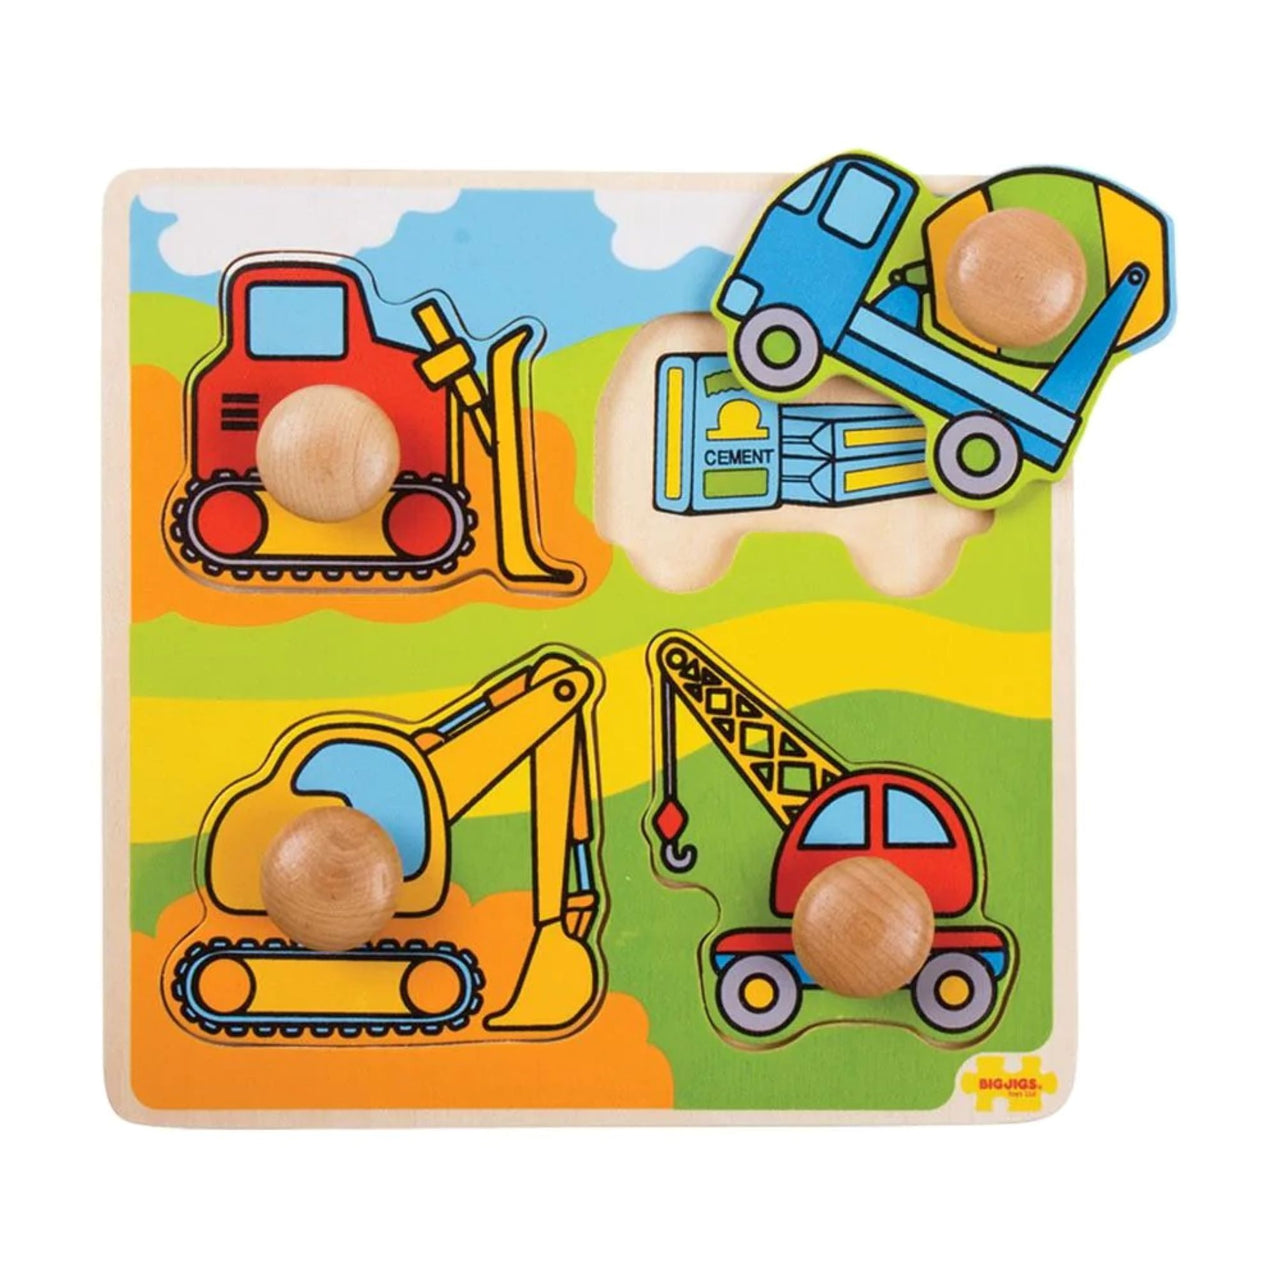 Easy to lift wooden puzzle pieces feature a pegged handle on each piece. Each chunky wooden puzzle piece is generously sized to make it easier for little hands to lift, grasp, examine and replace. Match each brightly coloured wooden piece to the correctly shaped slot on the base board to reveal the four construction vehicles.